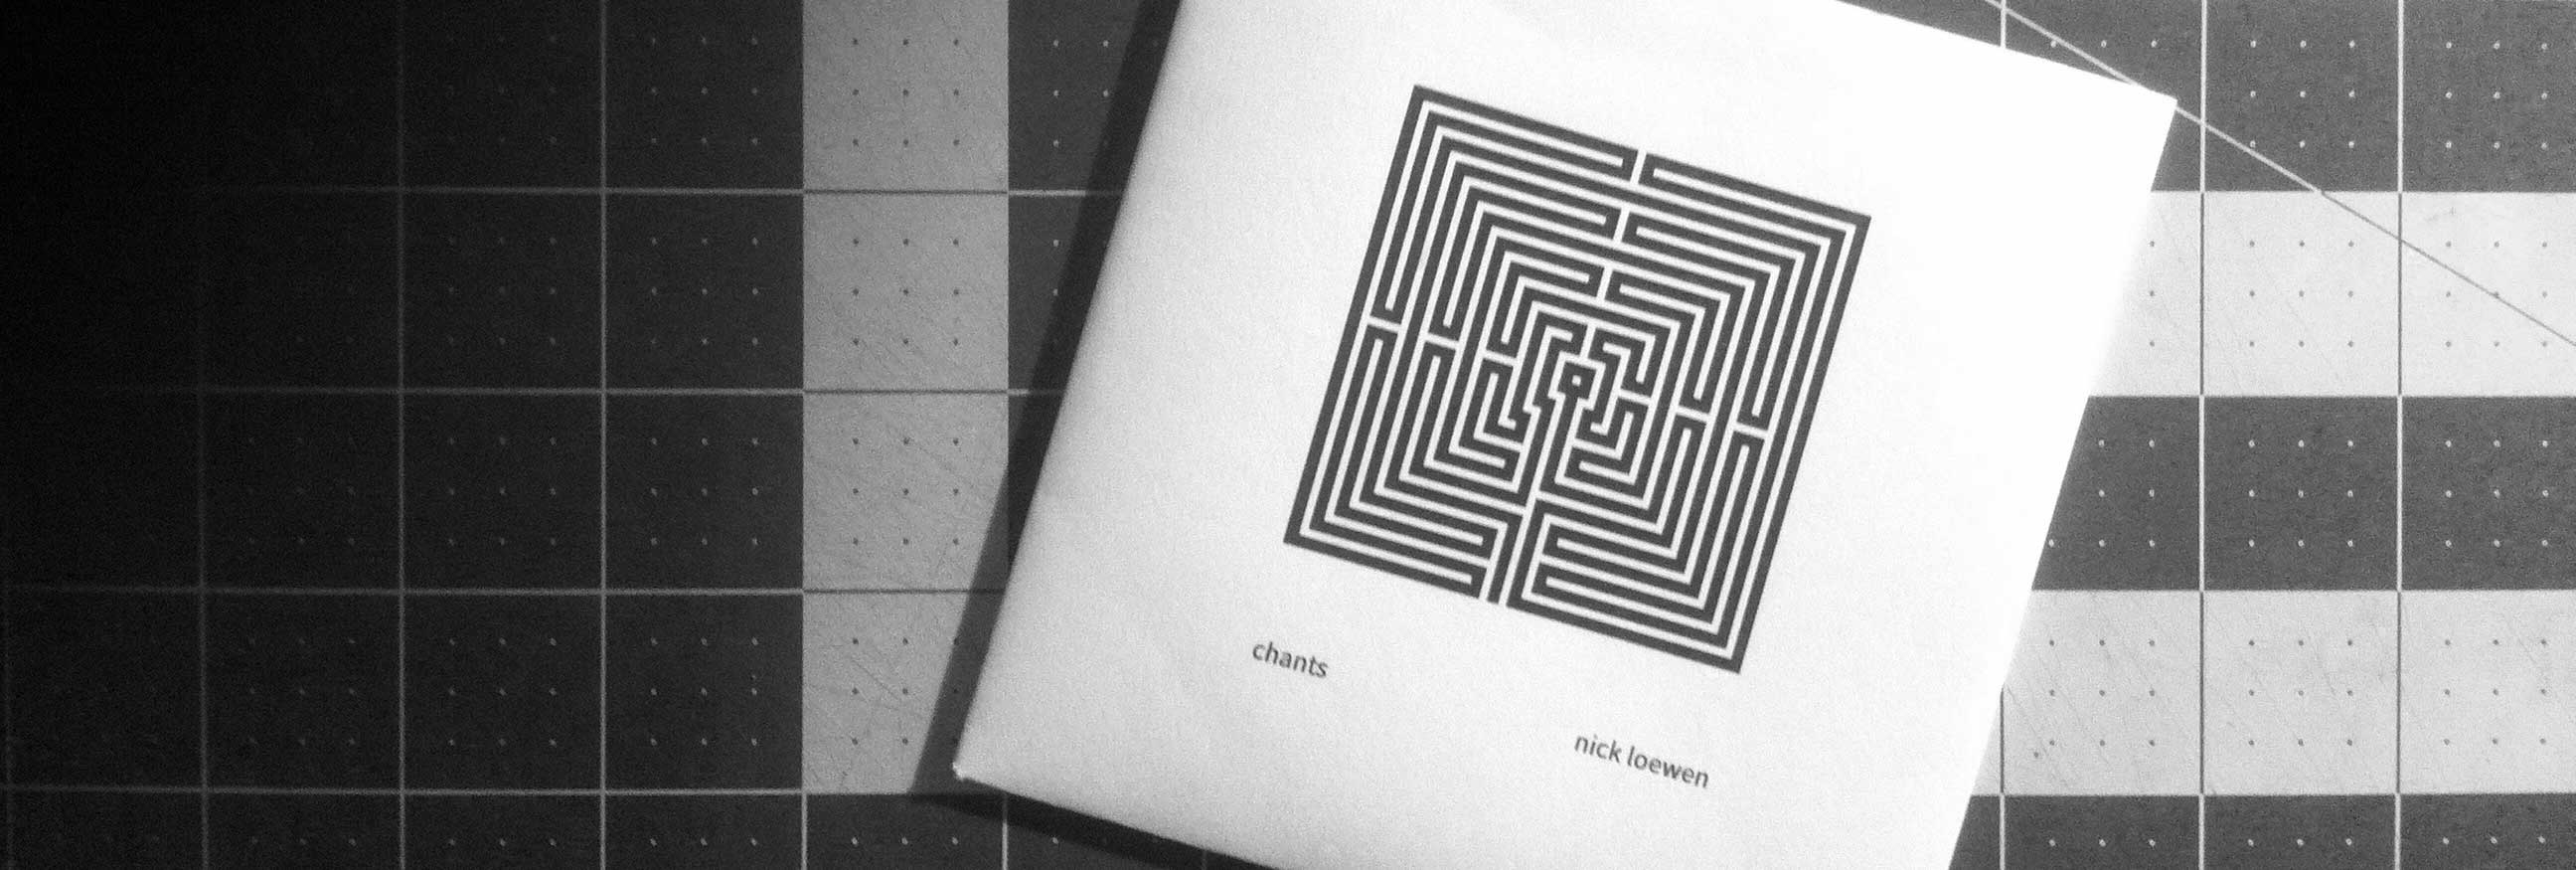 The album cover: a squared off illustration of a classical labyrinth, in stark black and white.